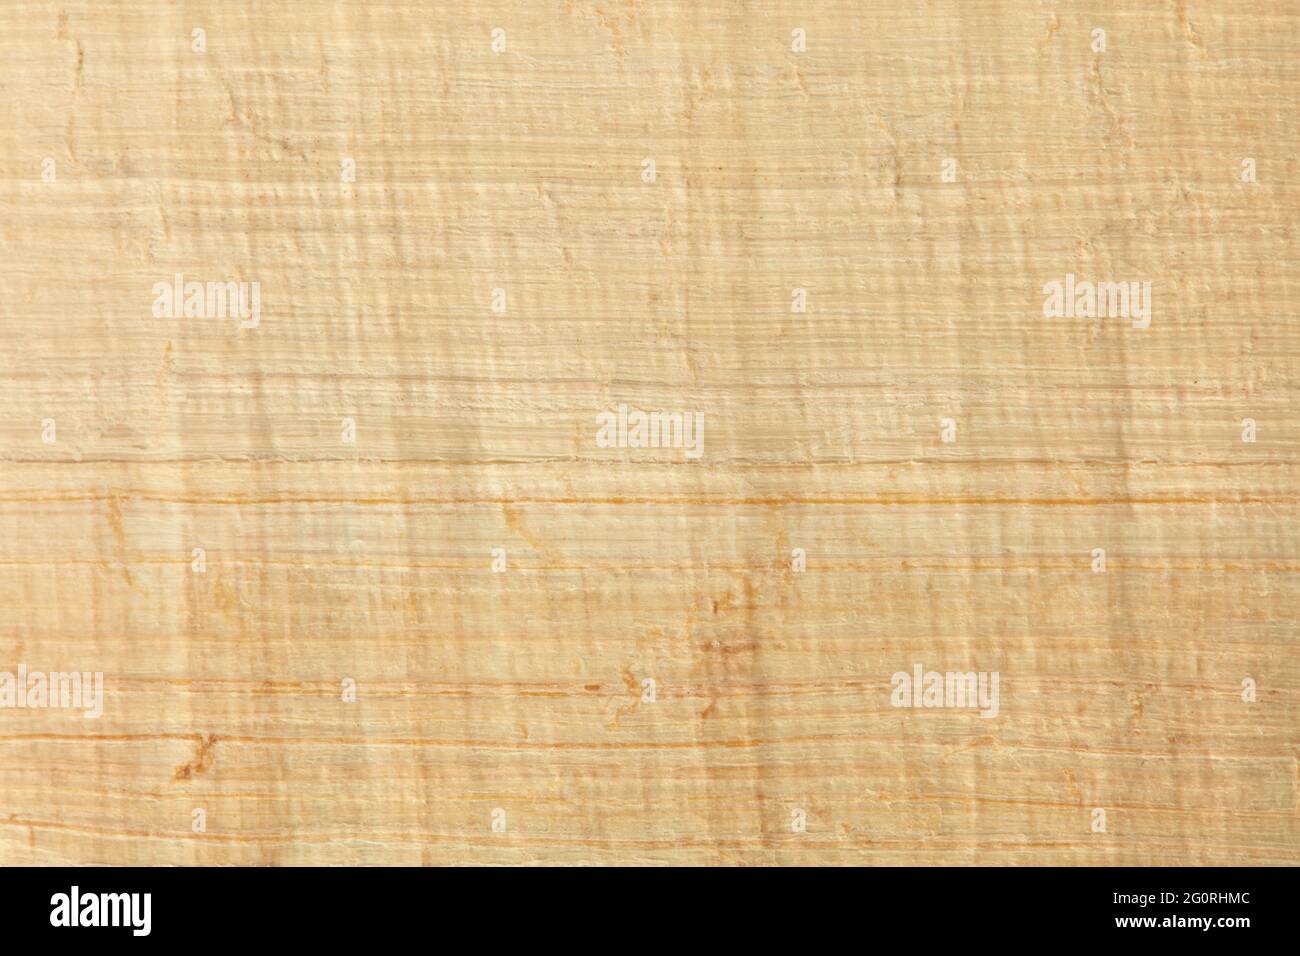 Papyrus paper texture background Stock Photo